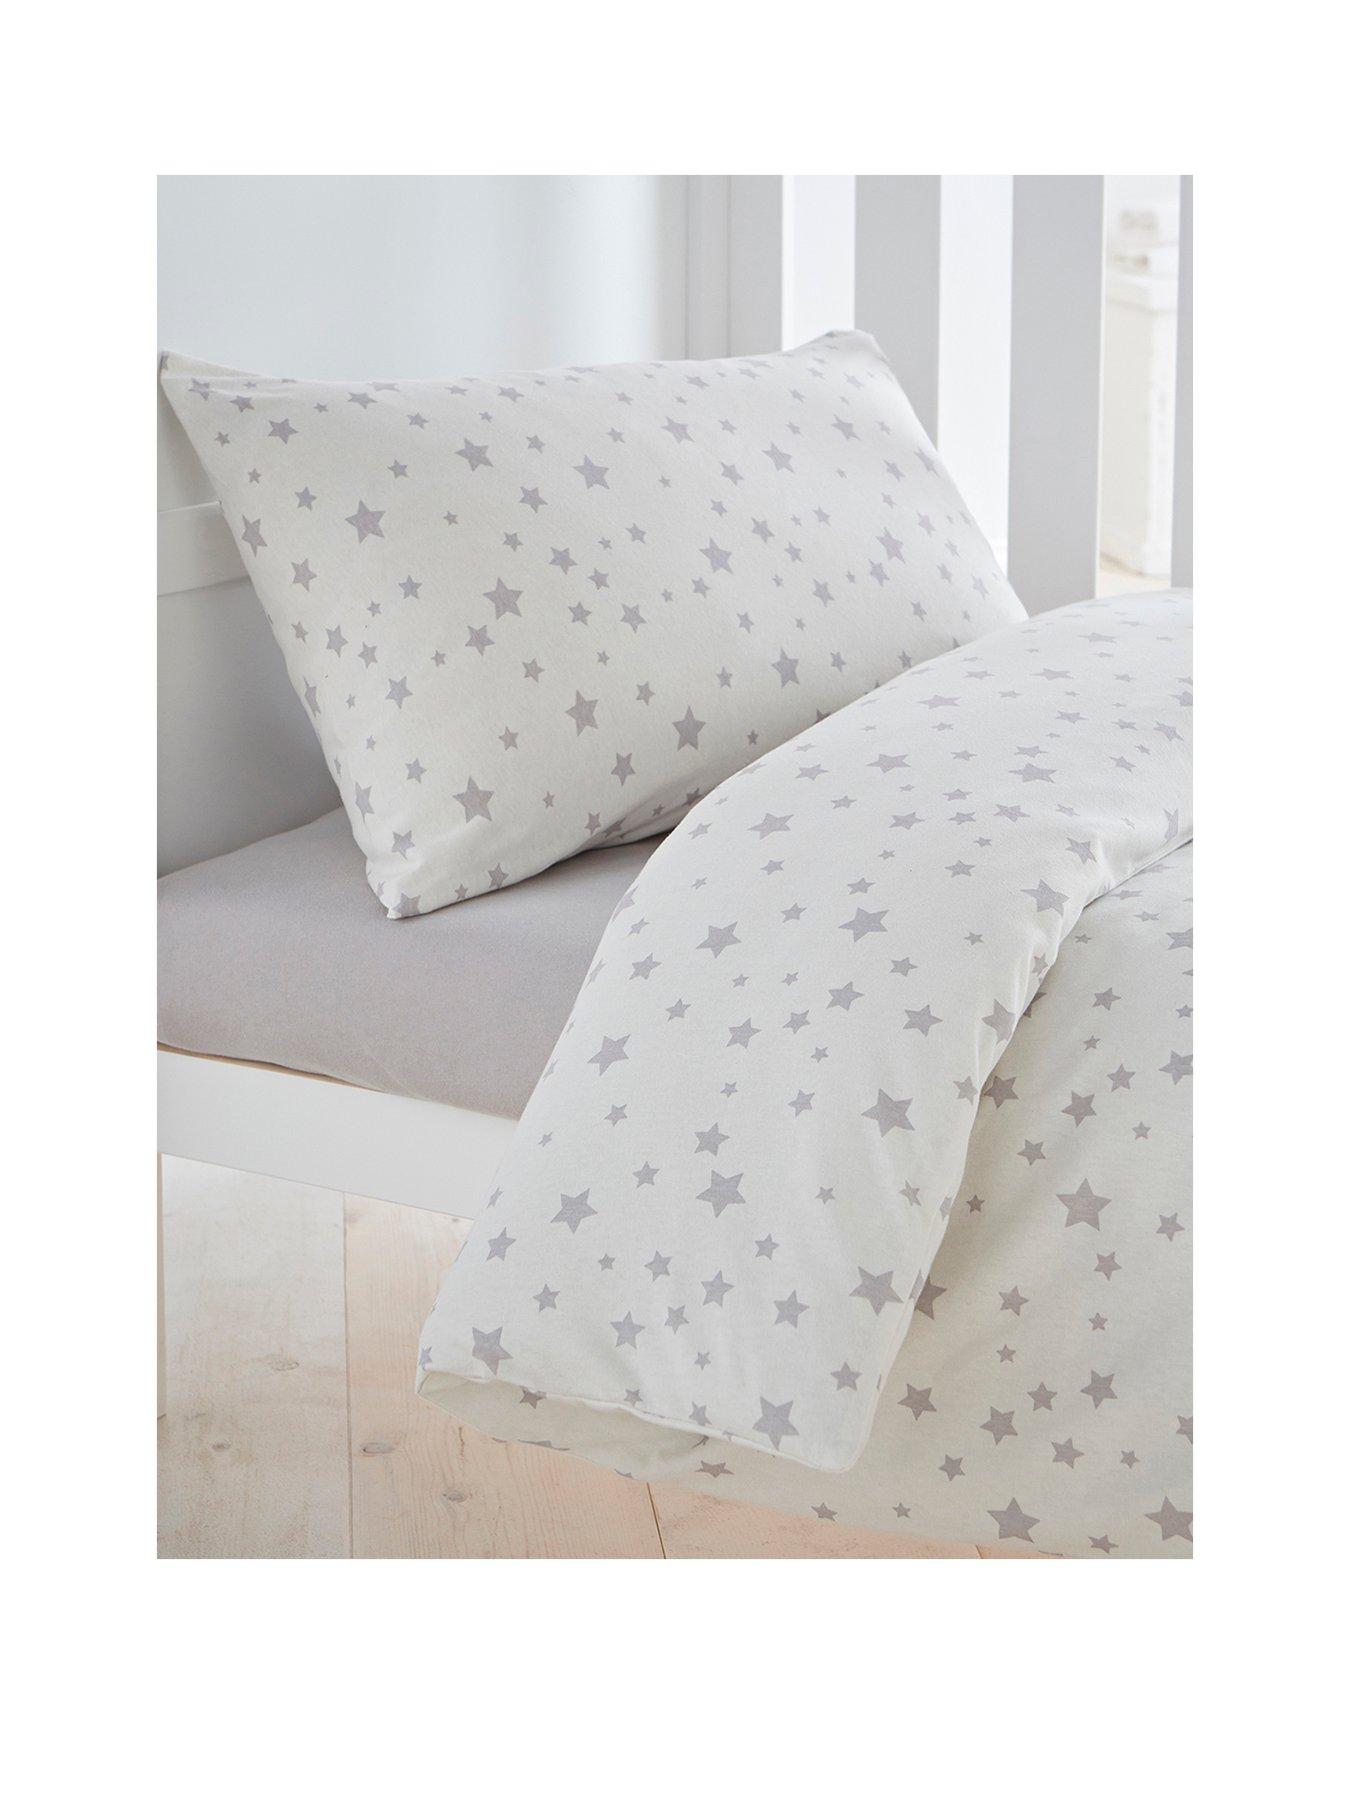 baby cot duvet cover